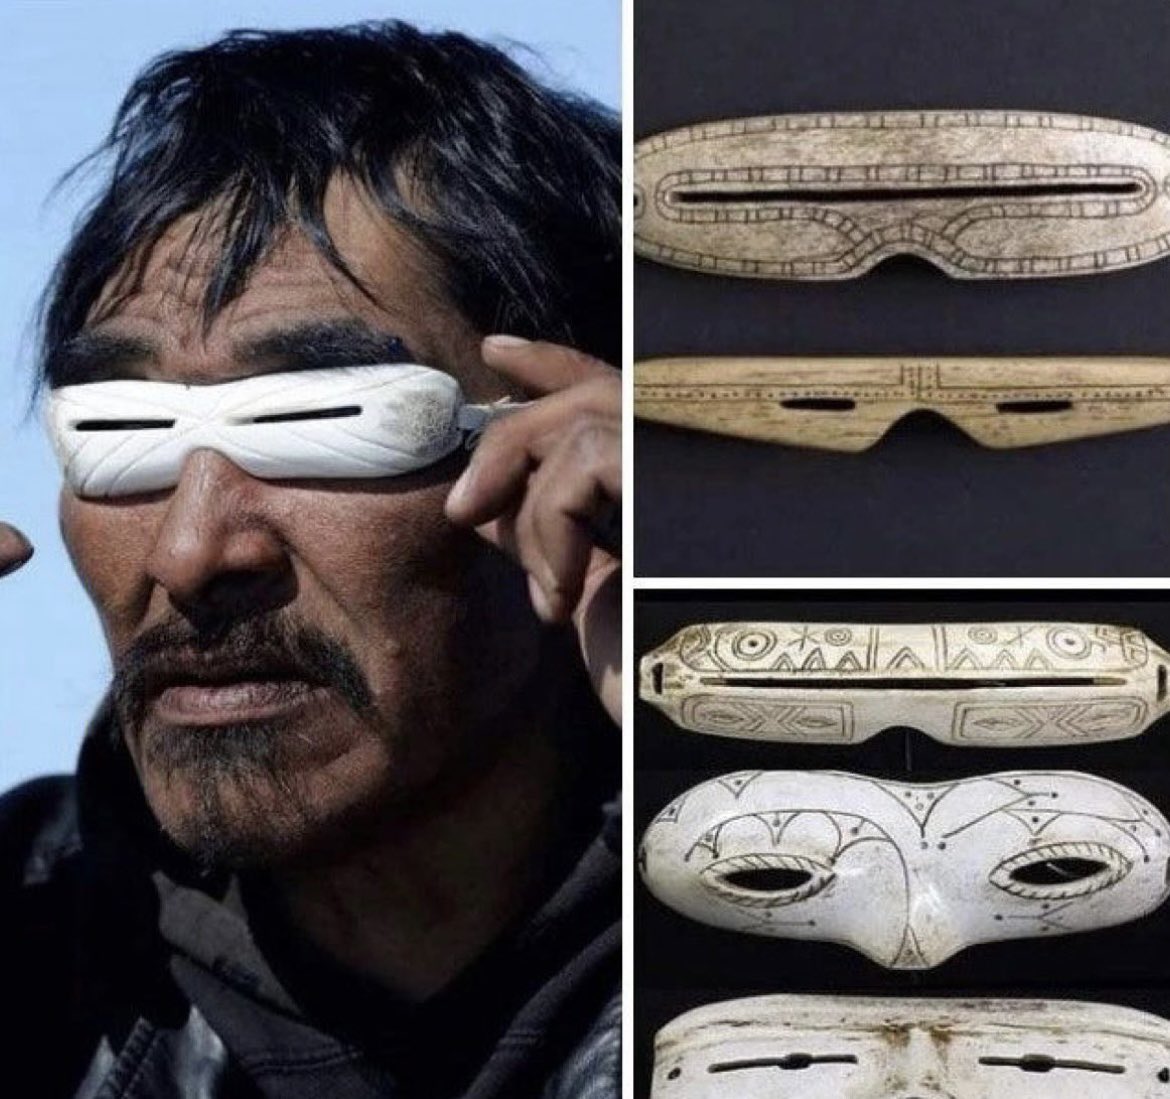 Centuries ago, approximately 800 years prior, the indigenous Inuit and Yupik communities residing in Alaska and northern regions of Canada ingeniously crafted small apertures on ivory and antler materials to fashion snow goggles. This innovative creation served the purpose of…